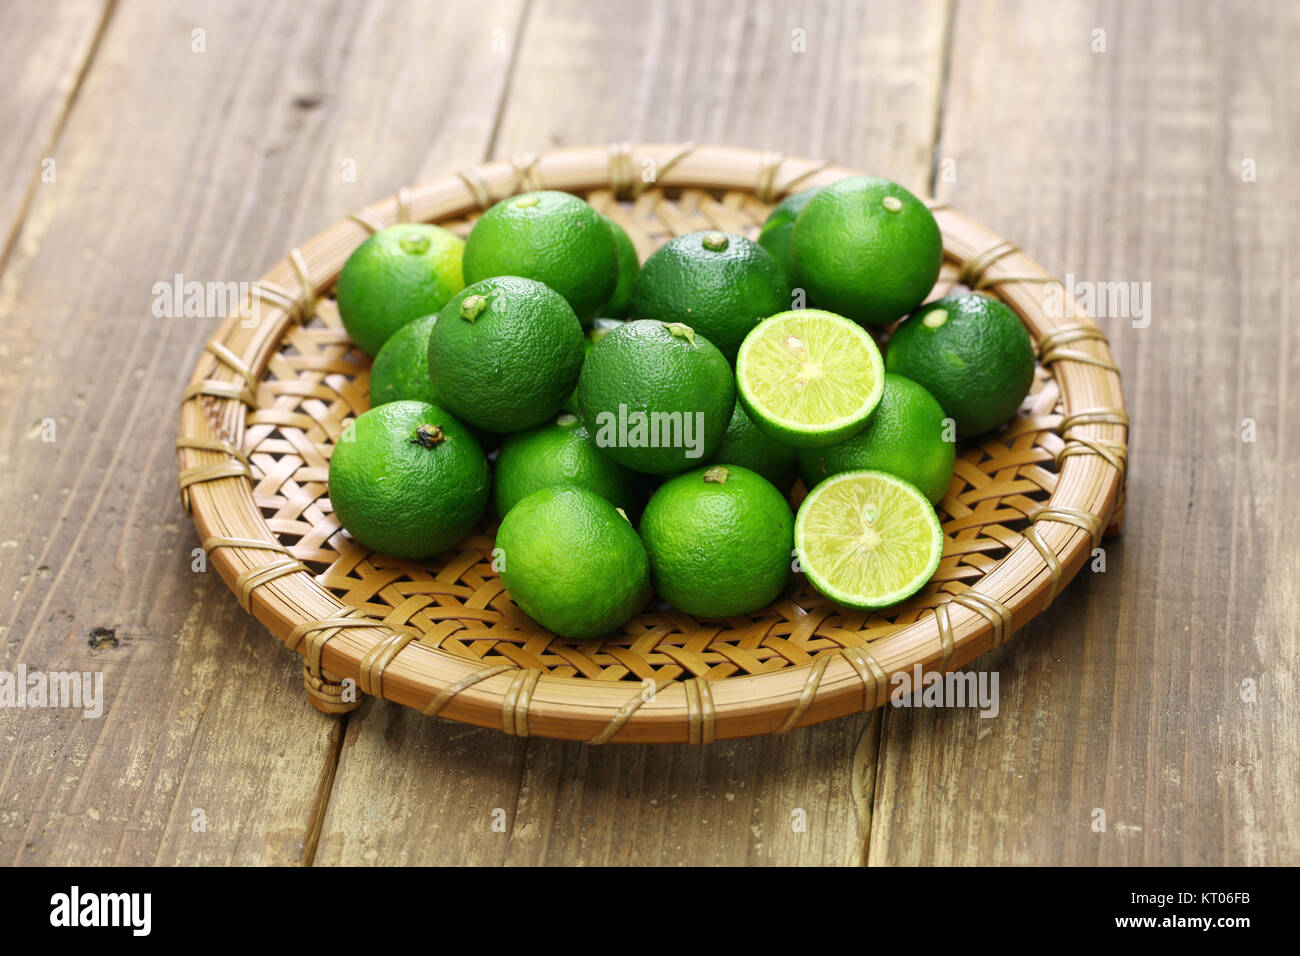 sudachi, japanese citrus fruit, is served as garnish with many traditional japanese dishes Stock Photo